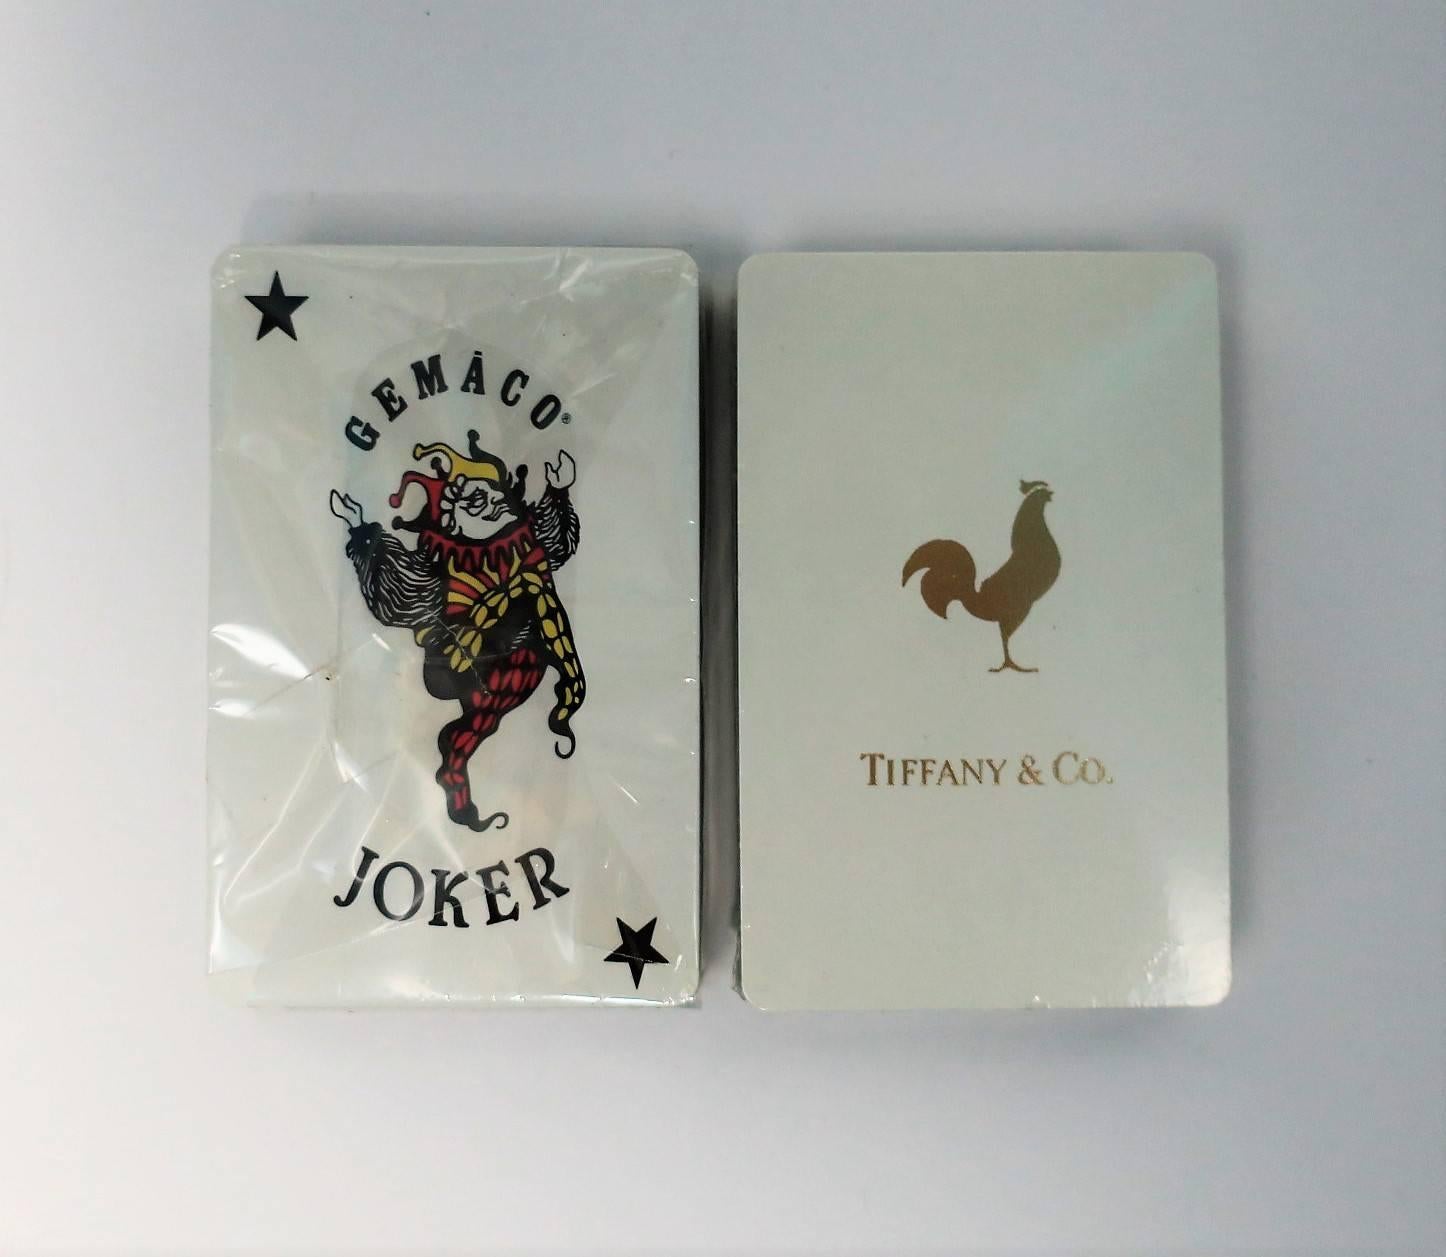 American Vintage Tiffany & Co. Playing Cards Game Set